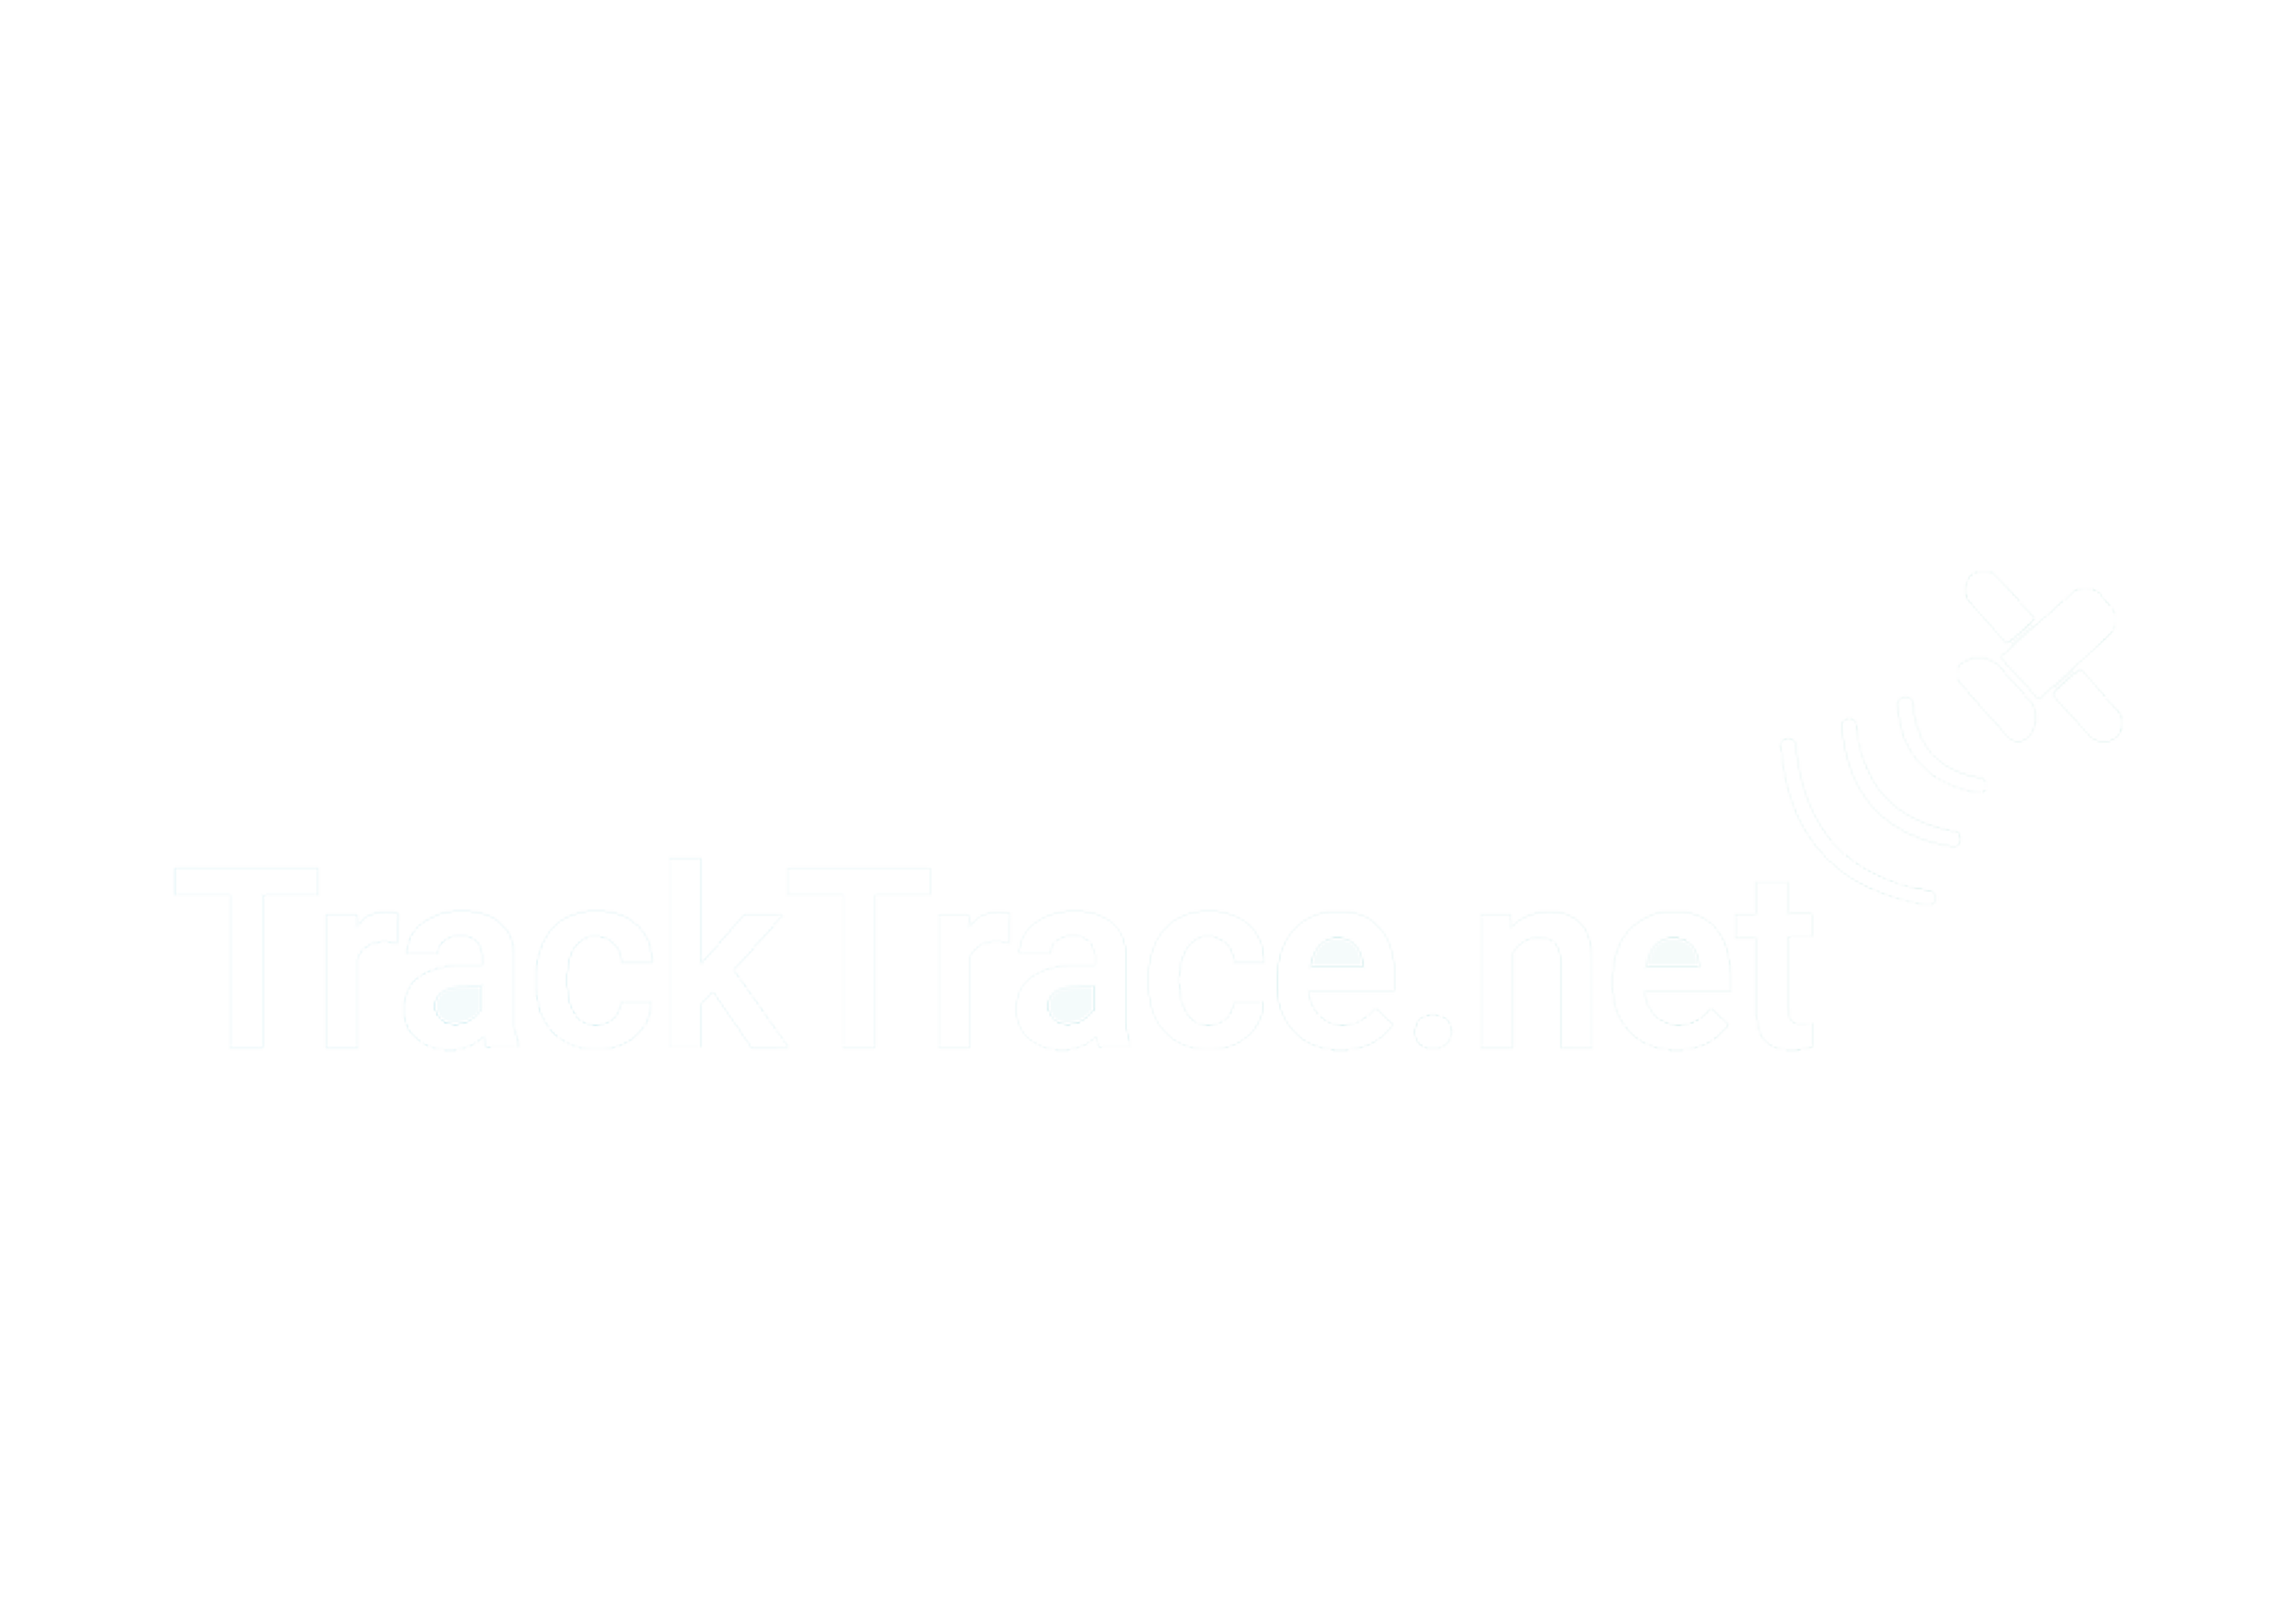 tracktrace